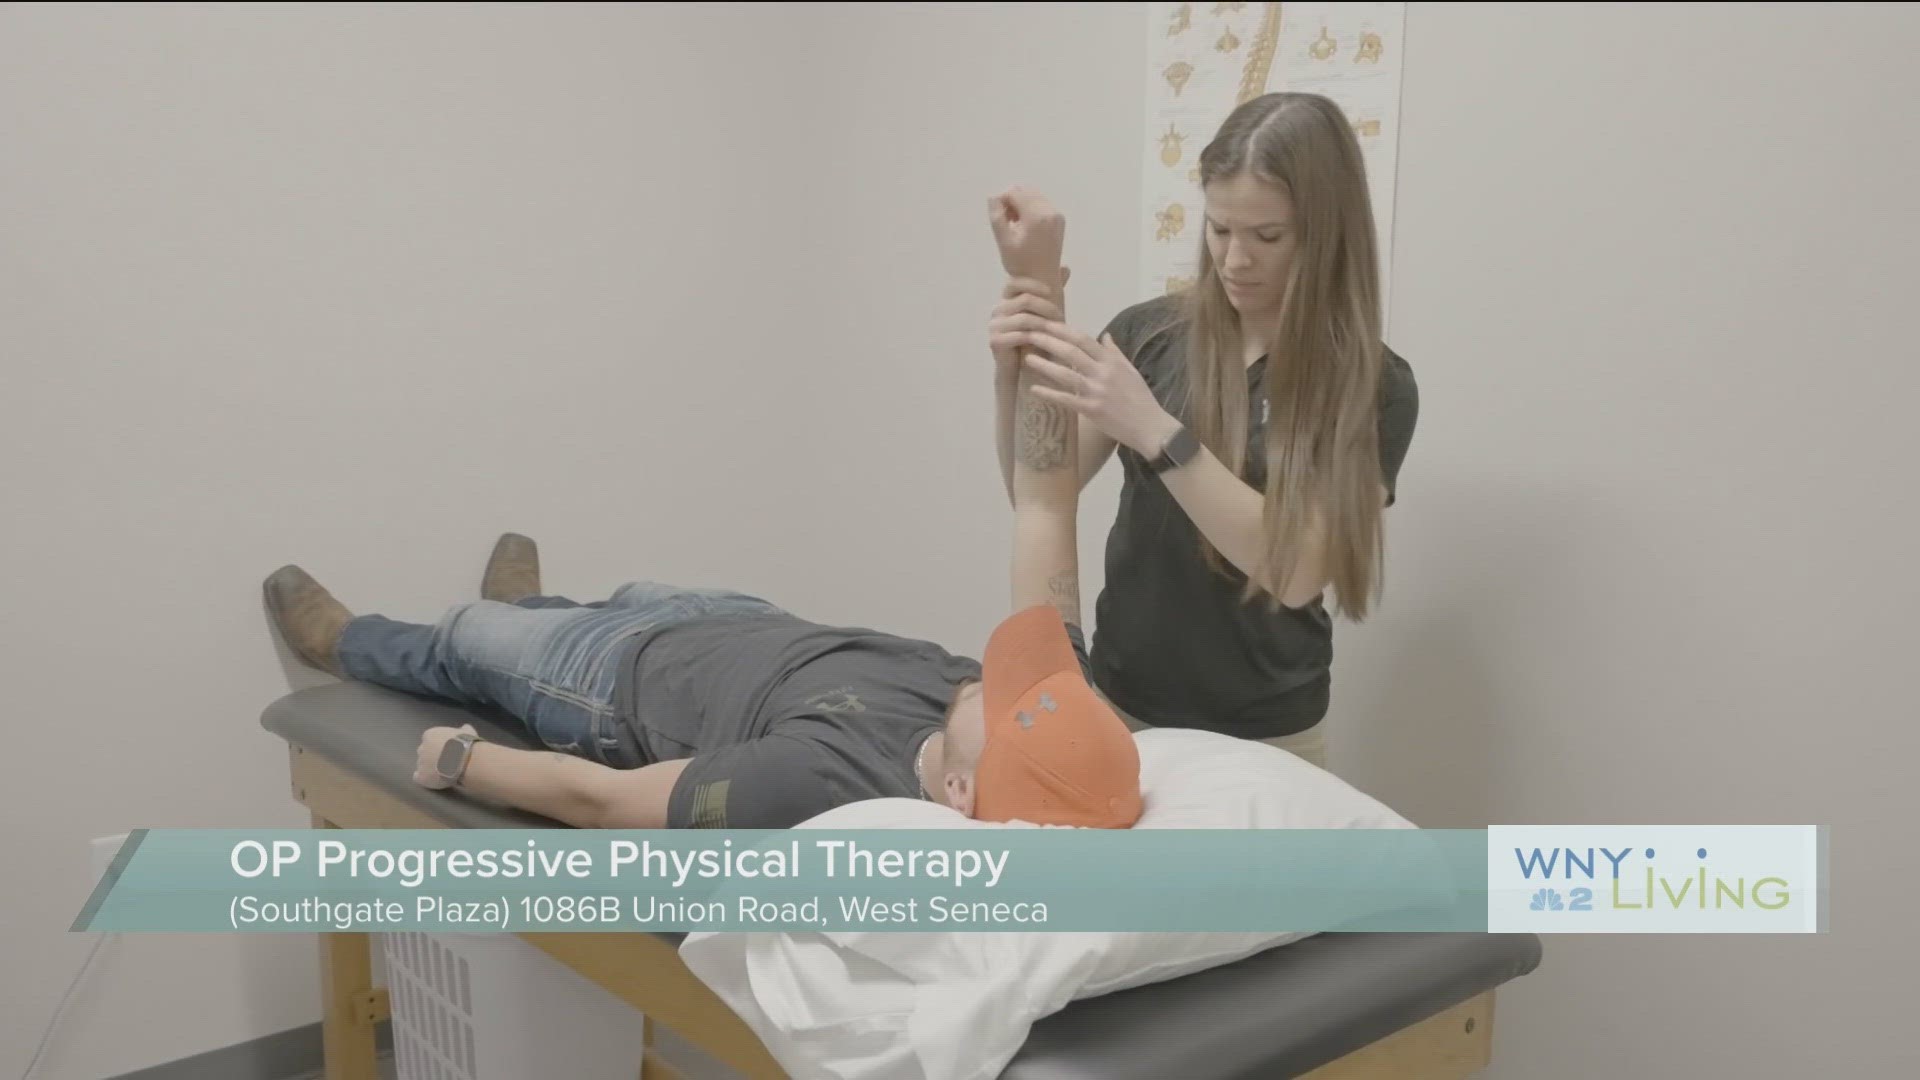 OP Progressive Physical Therapy (THIS VIDEO IS SPONSORED BY OP PROGRESSIVE PHYSICAL THERAPY)